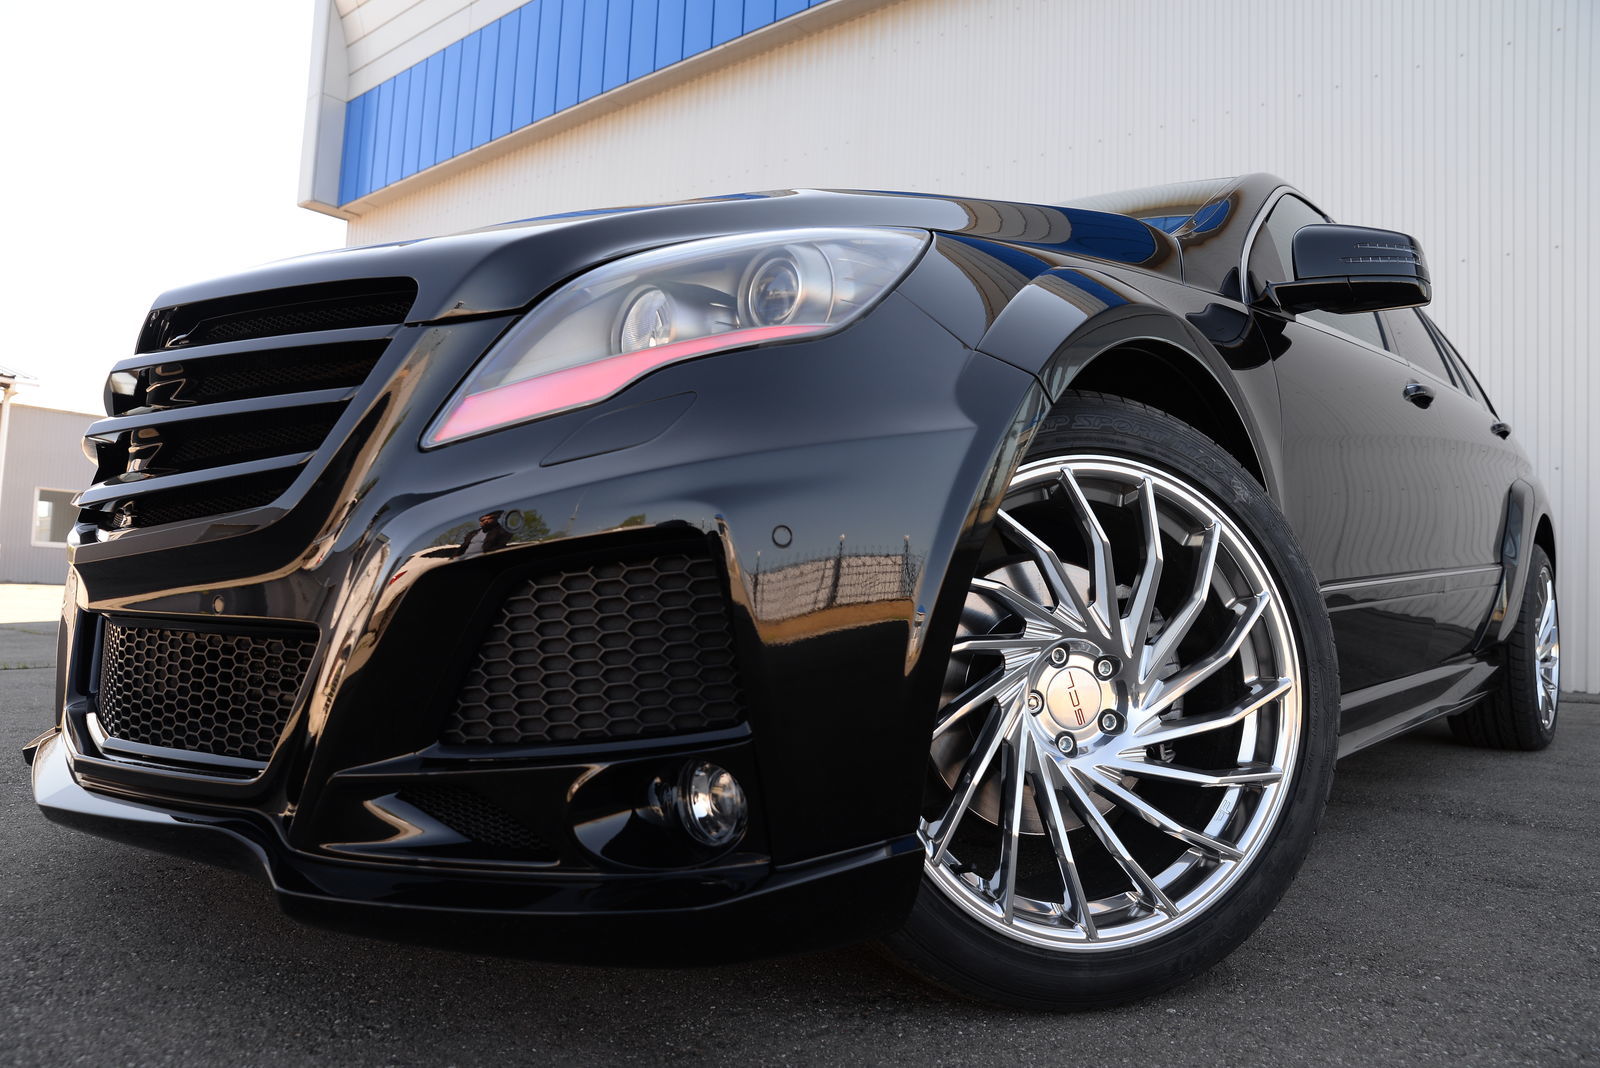 SCL PERFORMANCE body kit for Mercedes-Benz R-Class WOLF New model